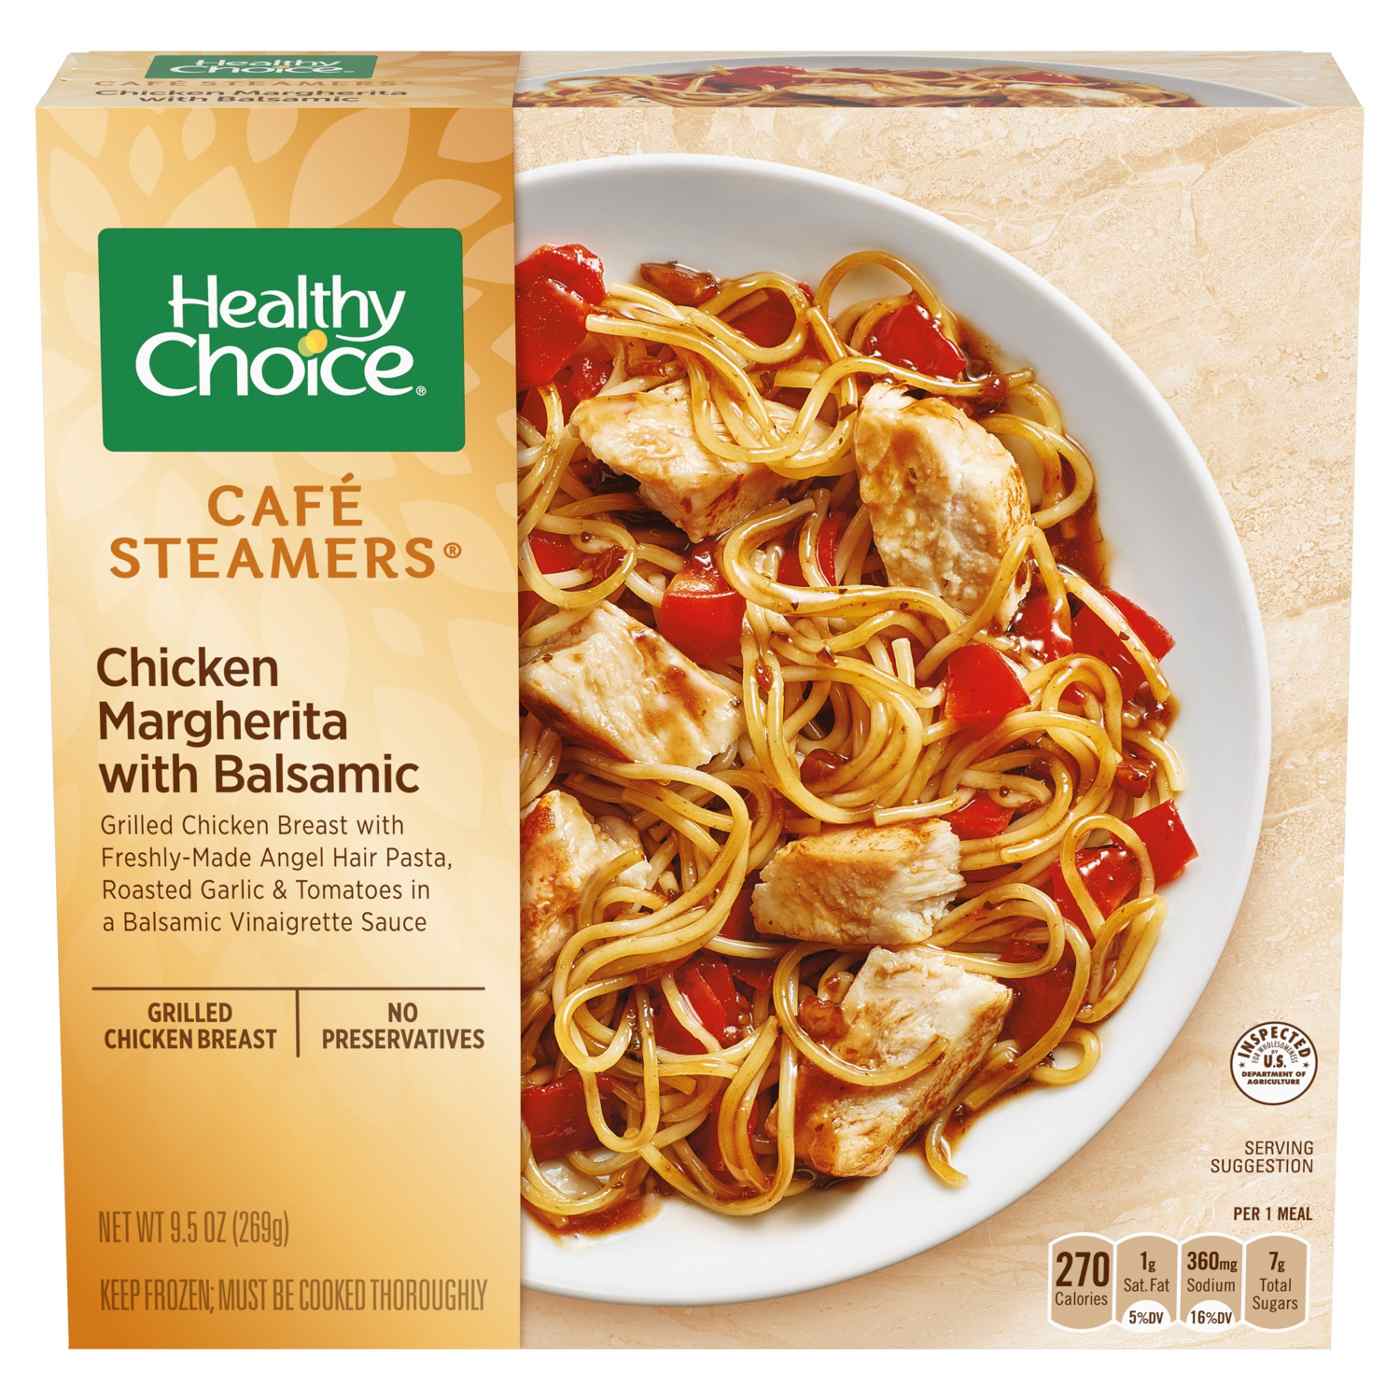 Healthy Choice Café Steamers Chicken Margherita Frozen Meal; image 1 of 7